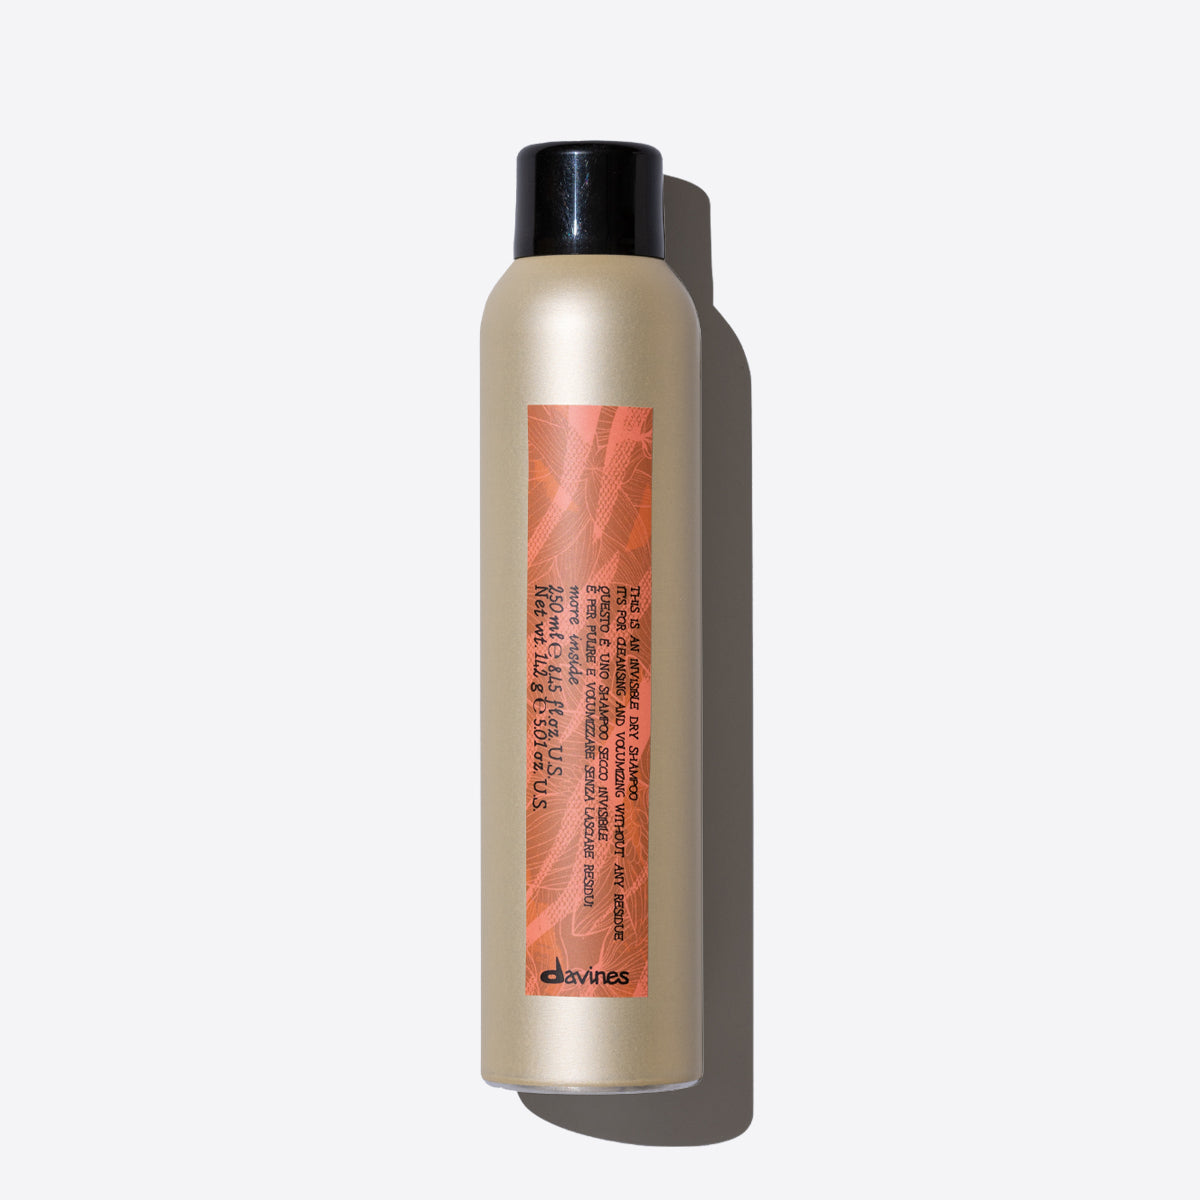 Davines More Inside This is an Invisible Dry Shampoo 8.45oz